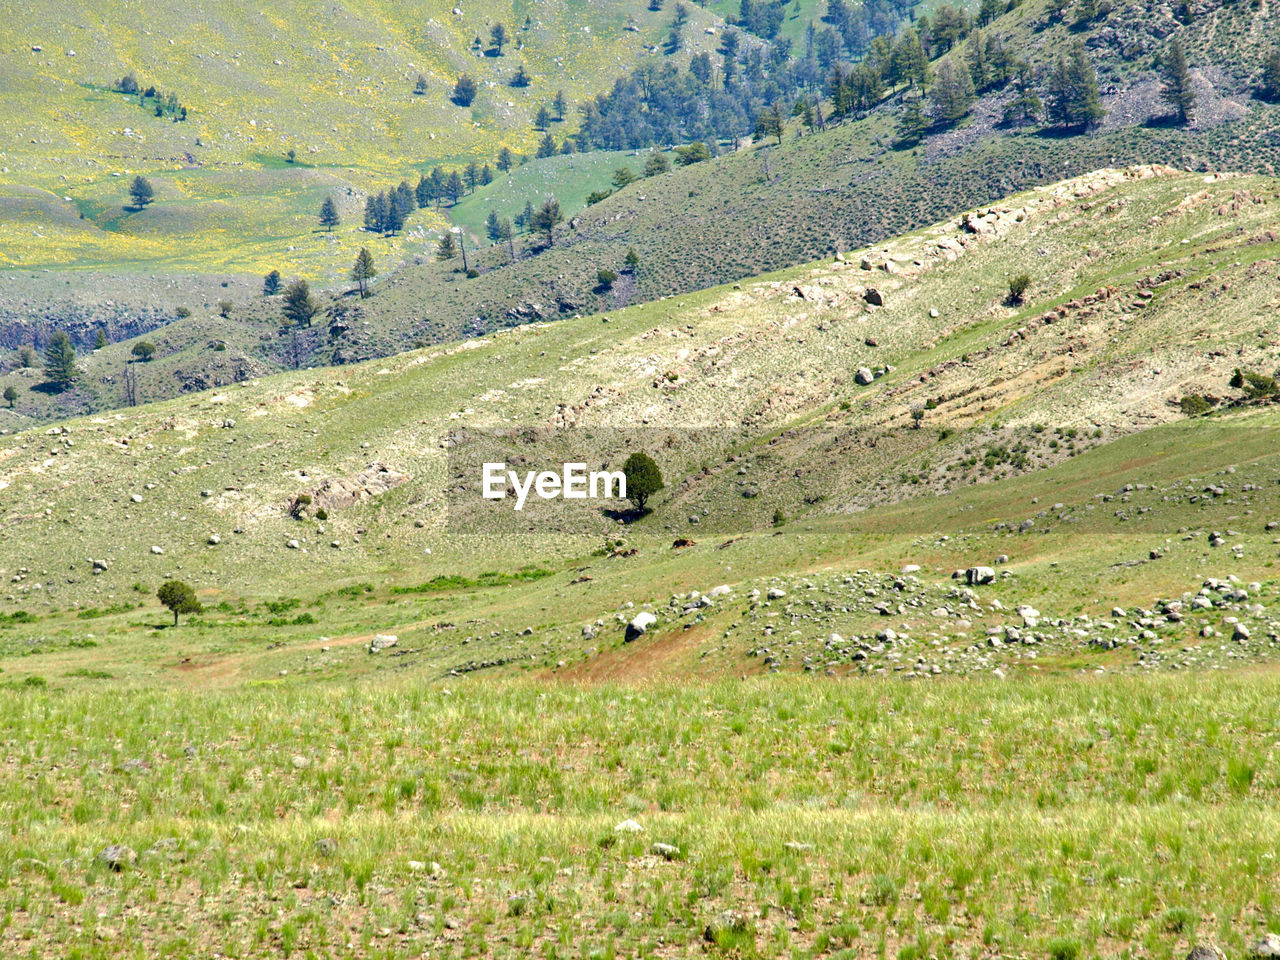 Scenic view of grassy landscape at yellowstone national park